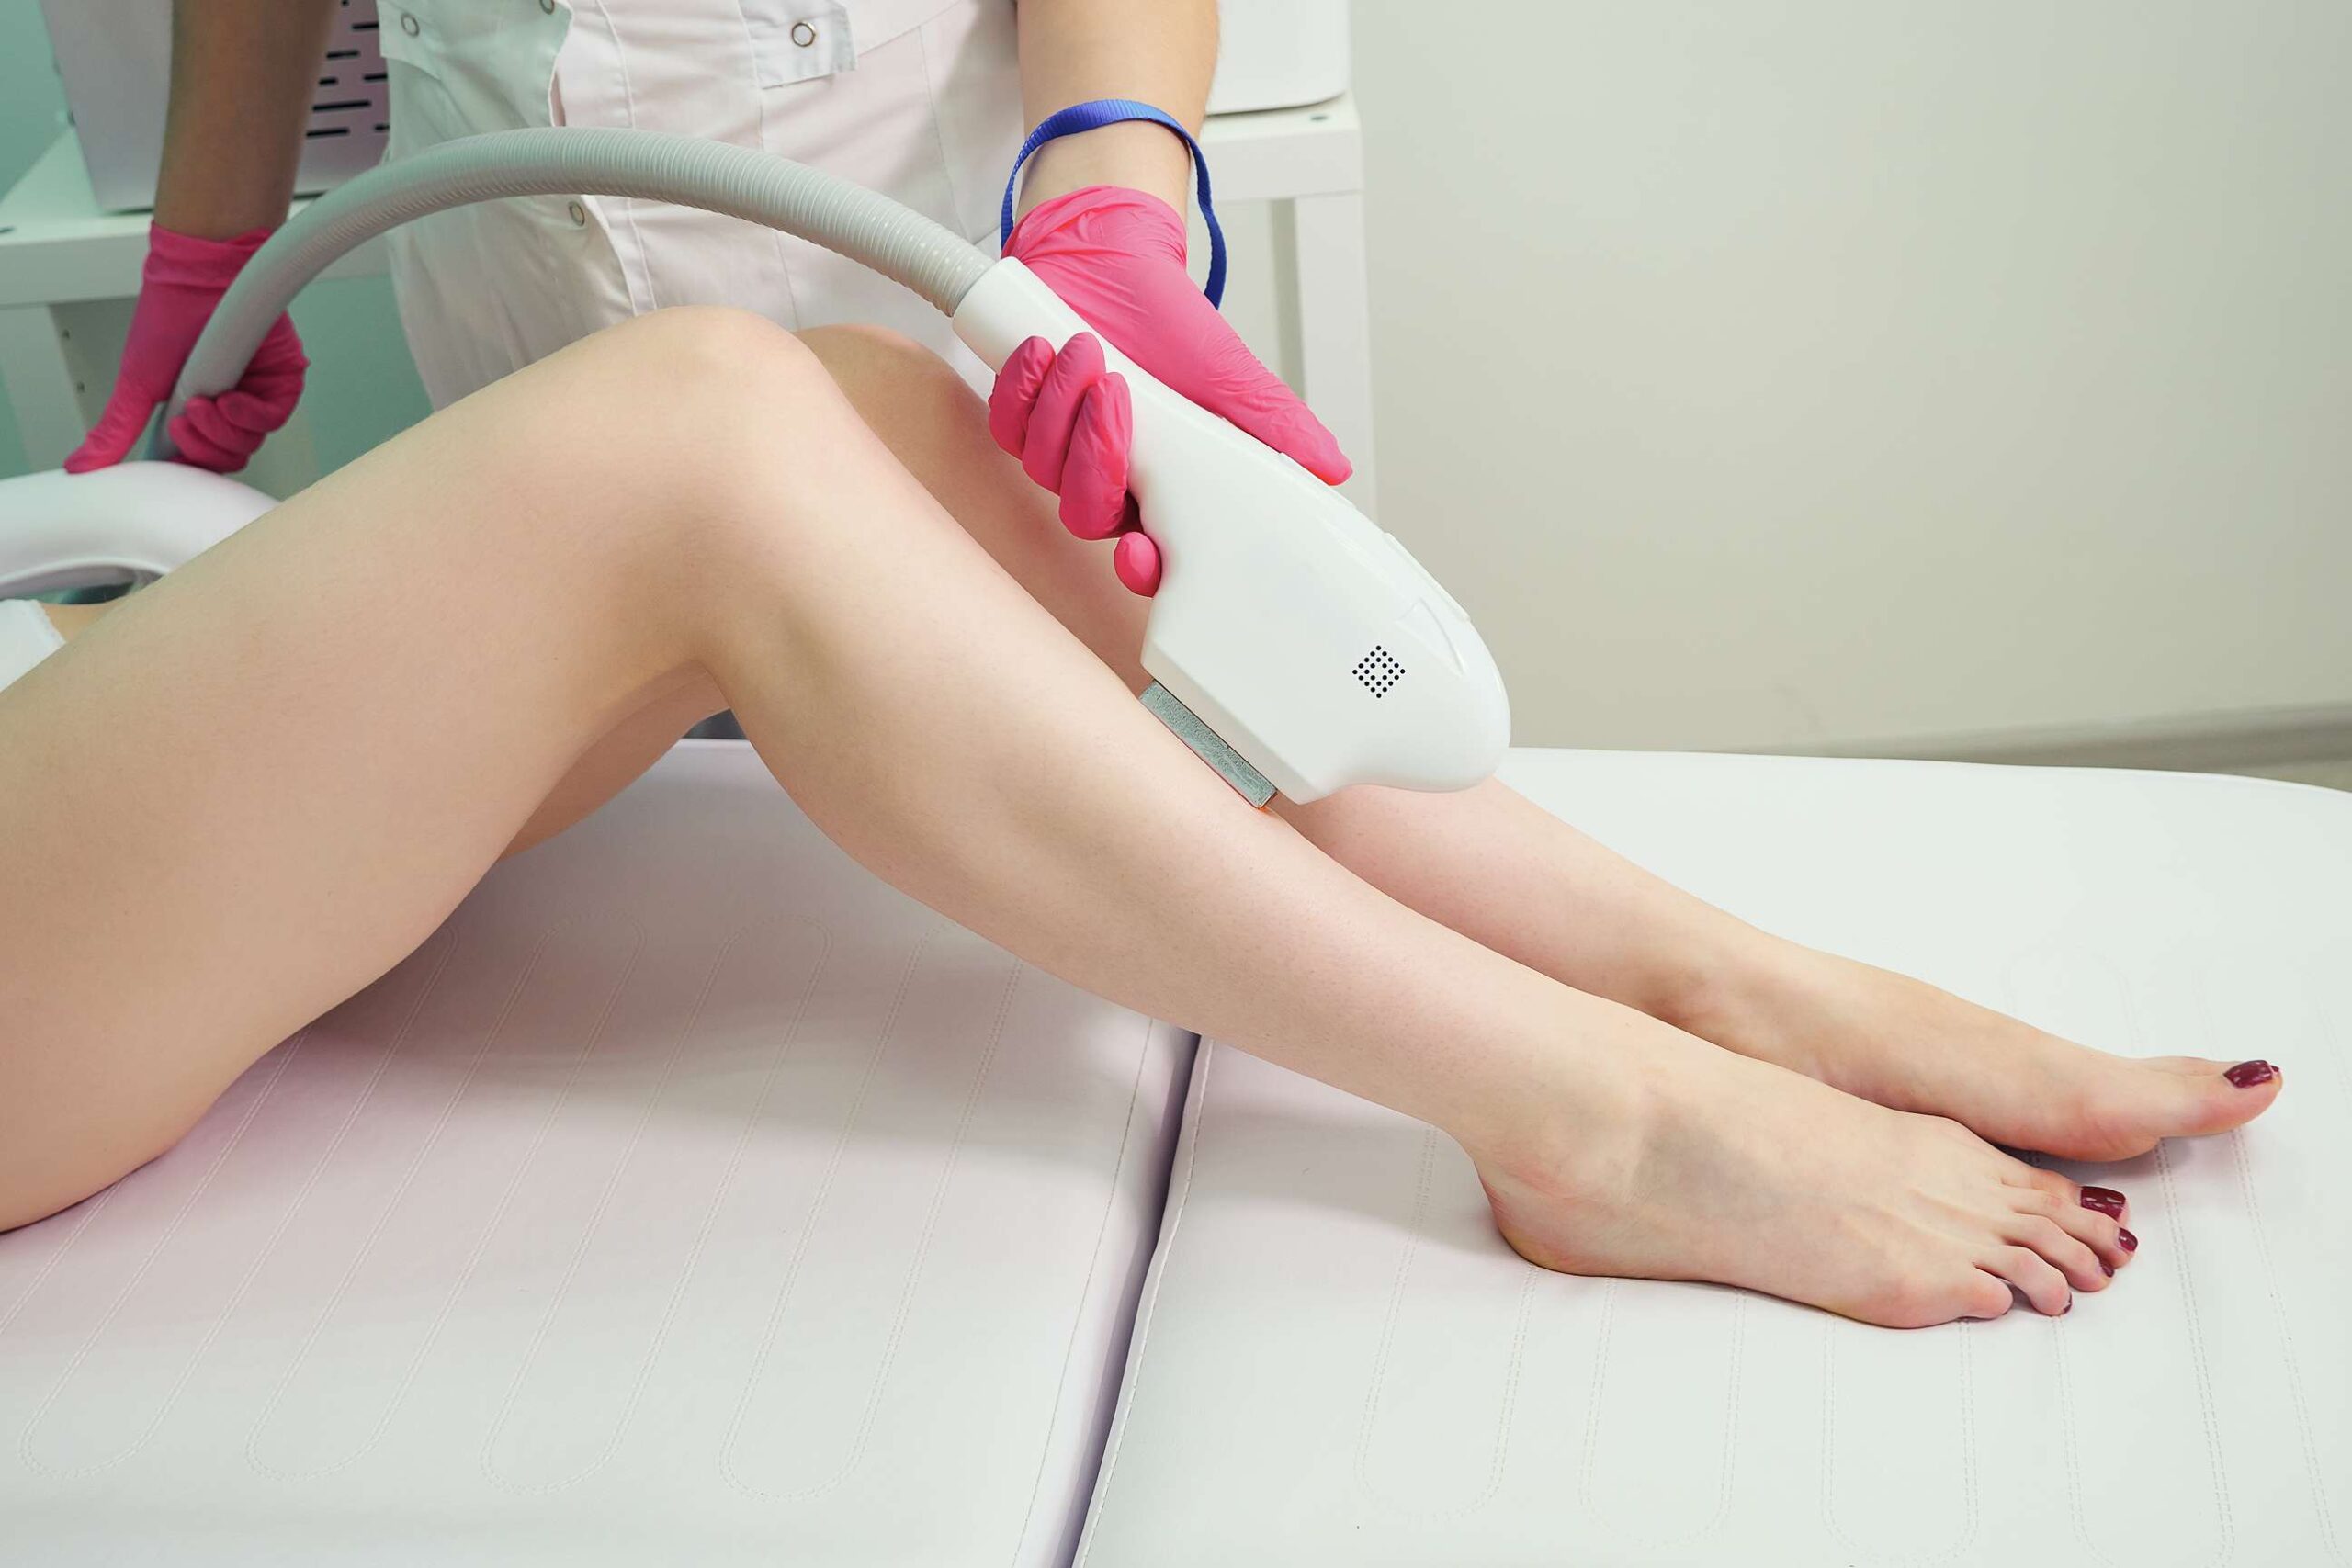 Laser Hair Removal | New Look Skin Center Medical Spa in Glendale, Encino and Irvine, CA